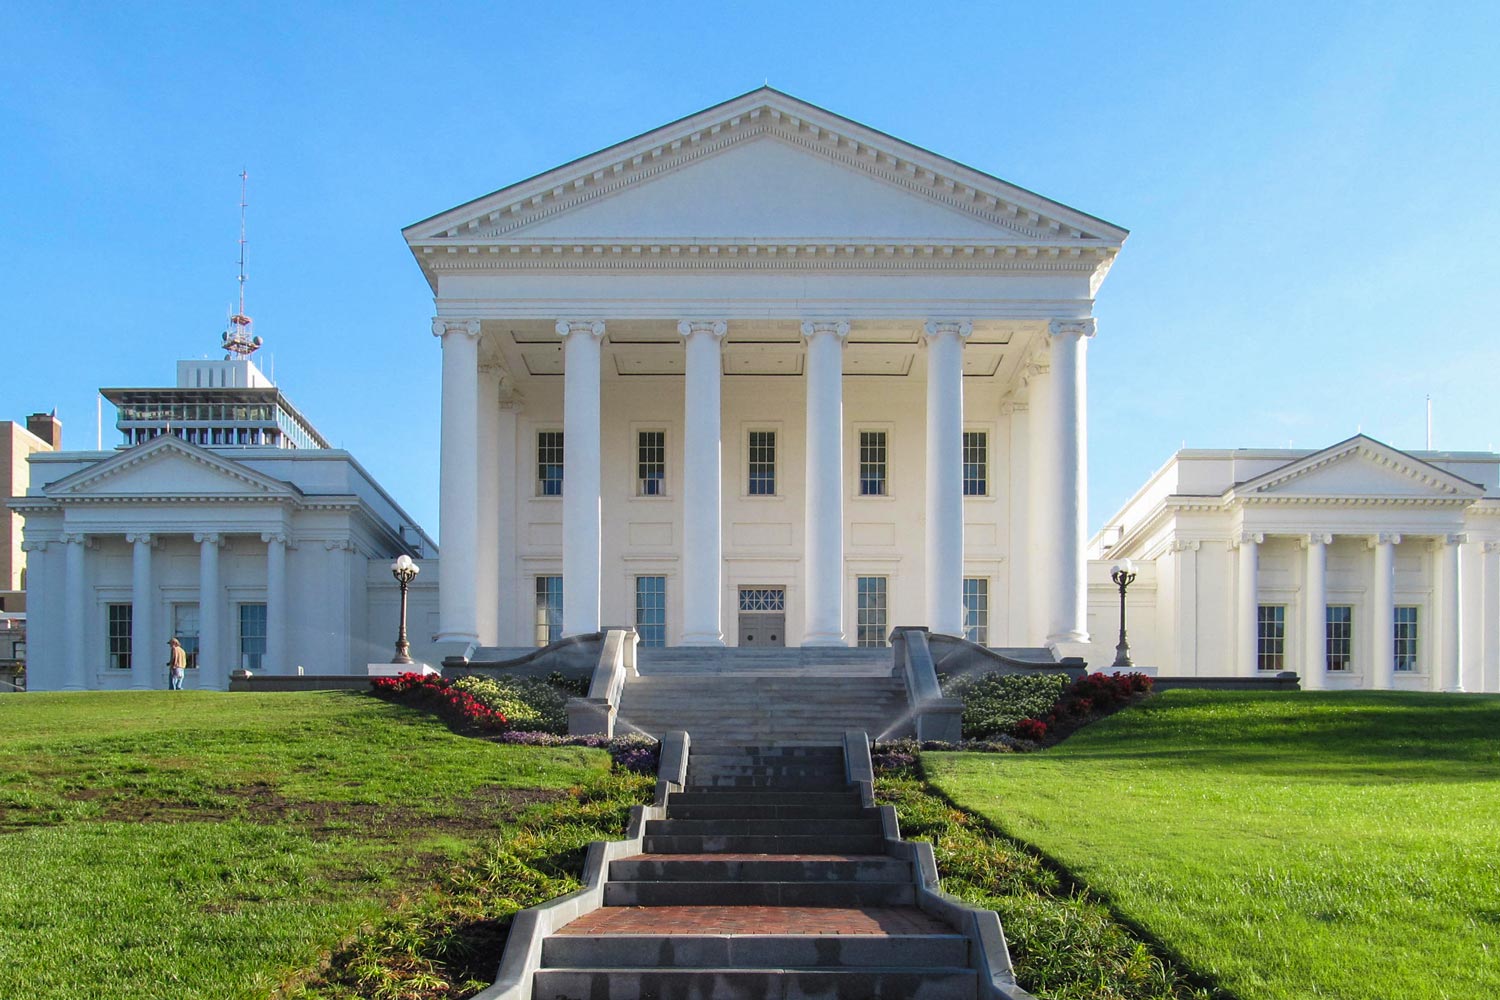 Virginia State Capitol building with six pillars in front